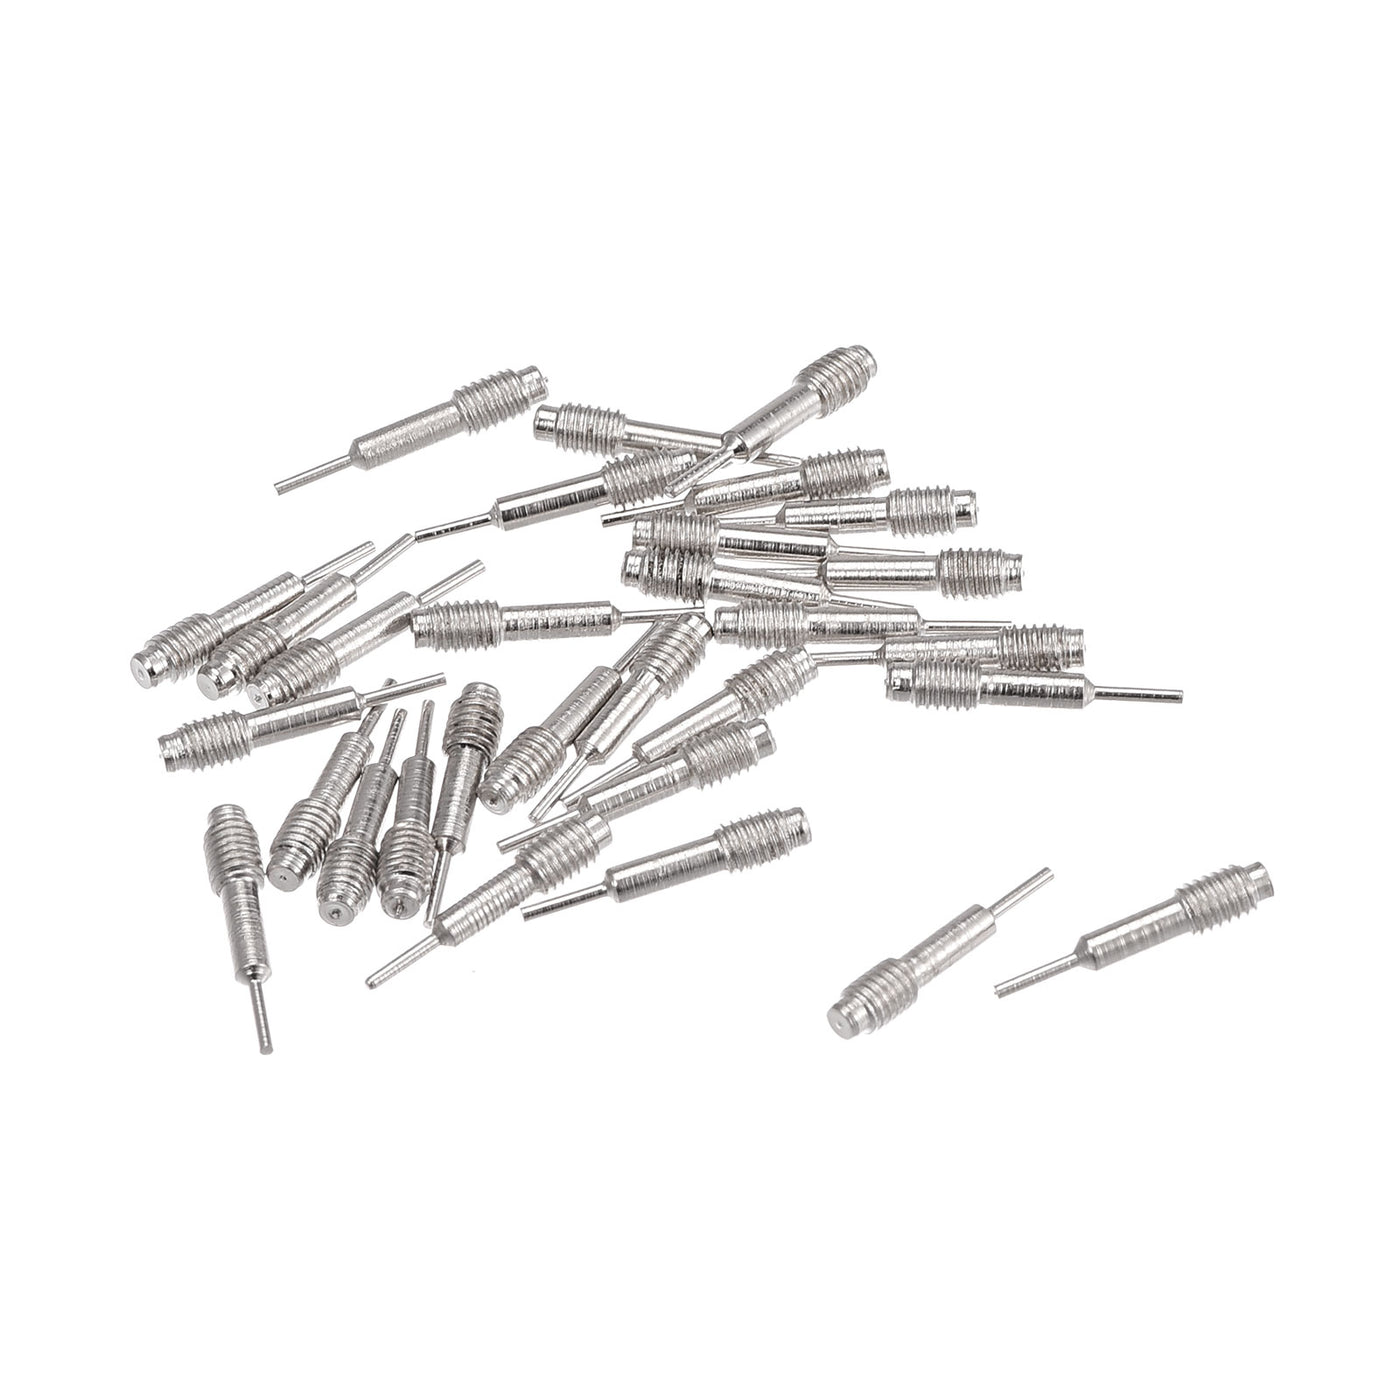 Uxcell Uxcell 30pcs Replace Pins for Watch Band Pin Punch Tool 0.8mm Dia Brass Link Pin Remover Punch Pins M3x0.5 Threads